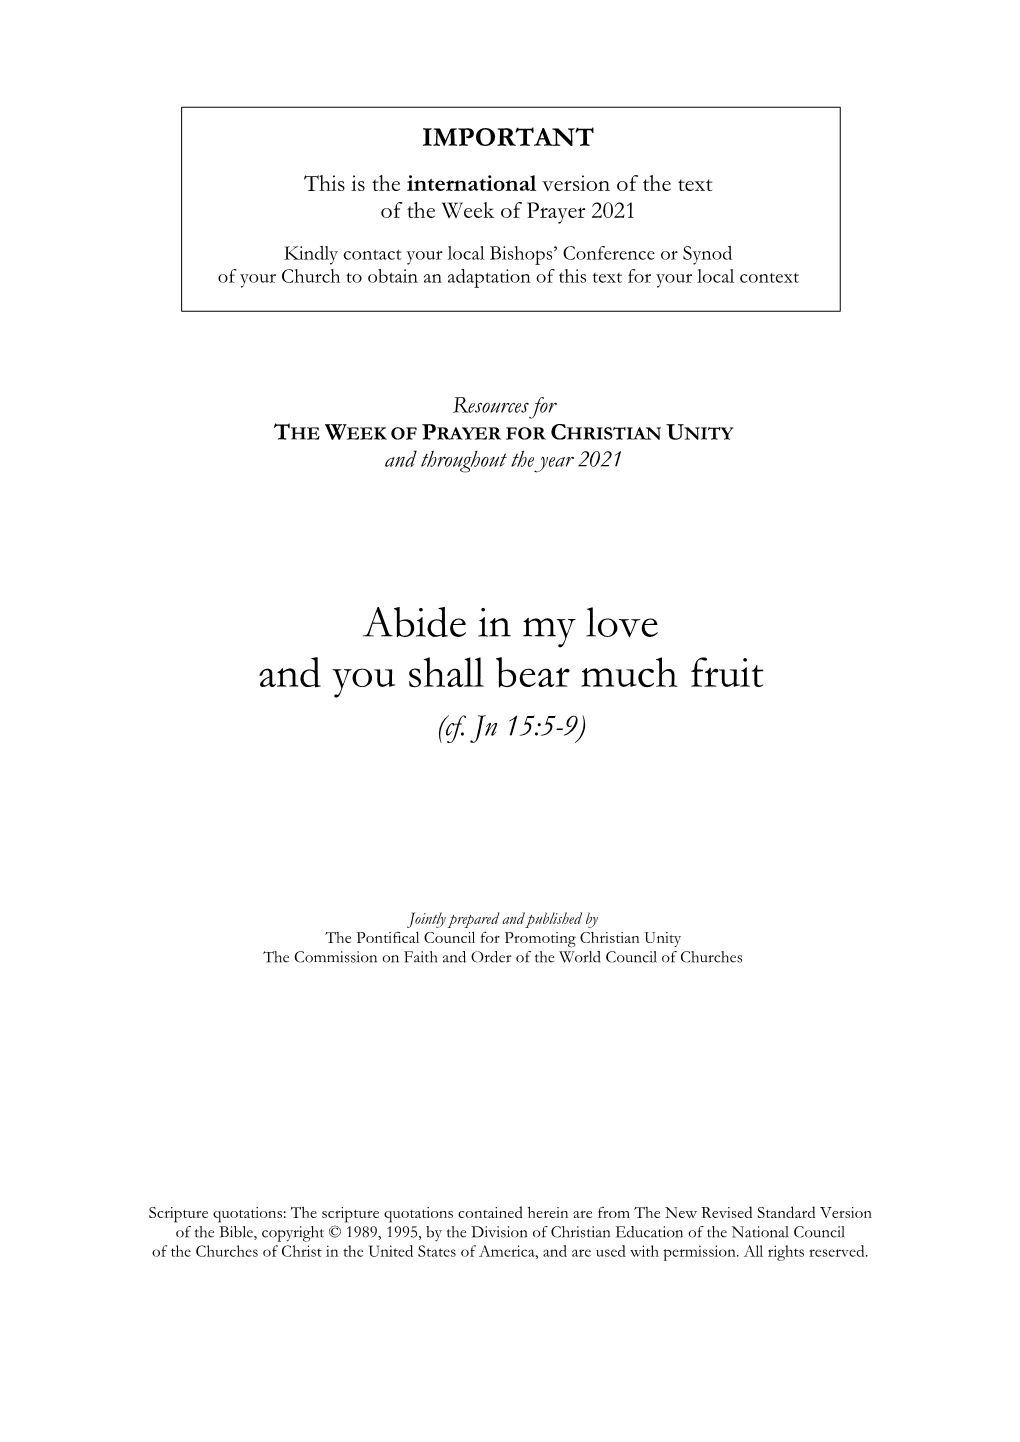 Abide in My Love and You Shall Bear Much Fruit (Cf